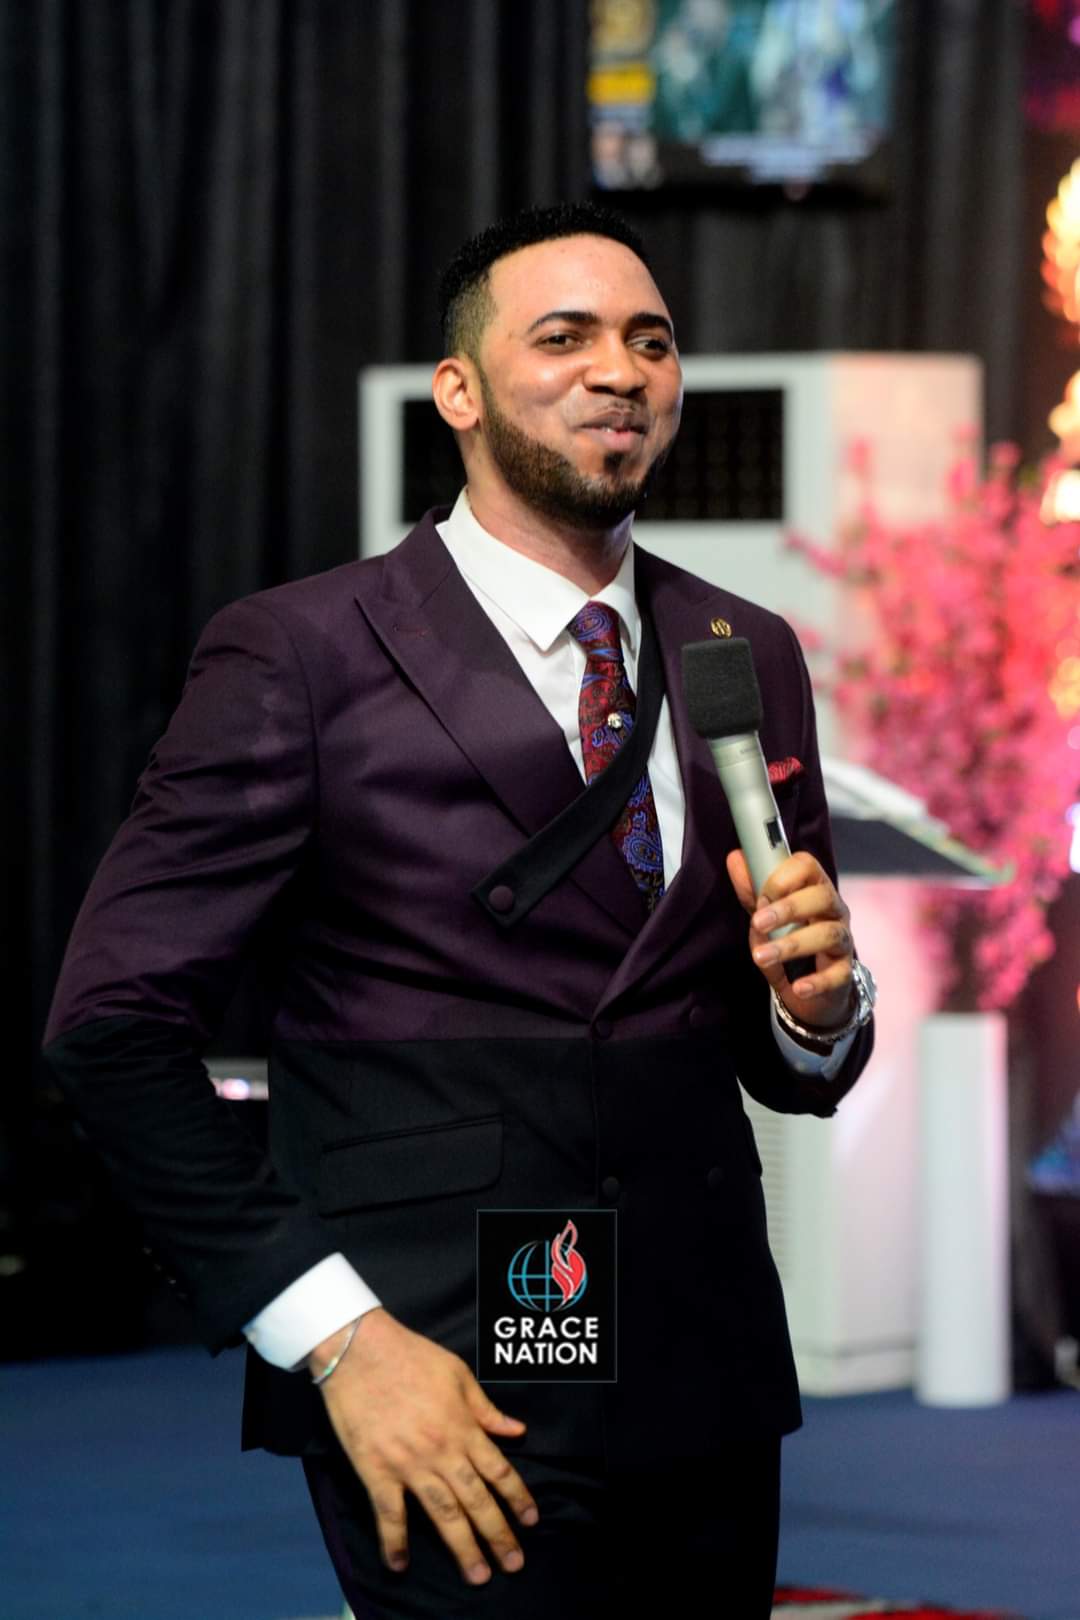 Dr Chris Okafor Honoured Again as Vibrant and Outstanding Prophetic Man of God at Prestige Excellence Award and Lecture 2022